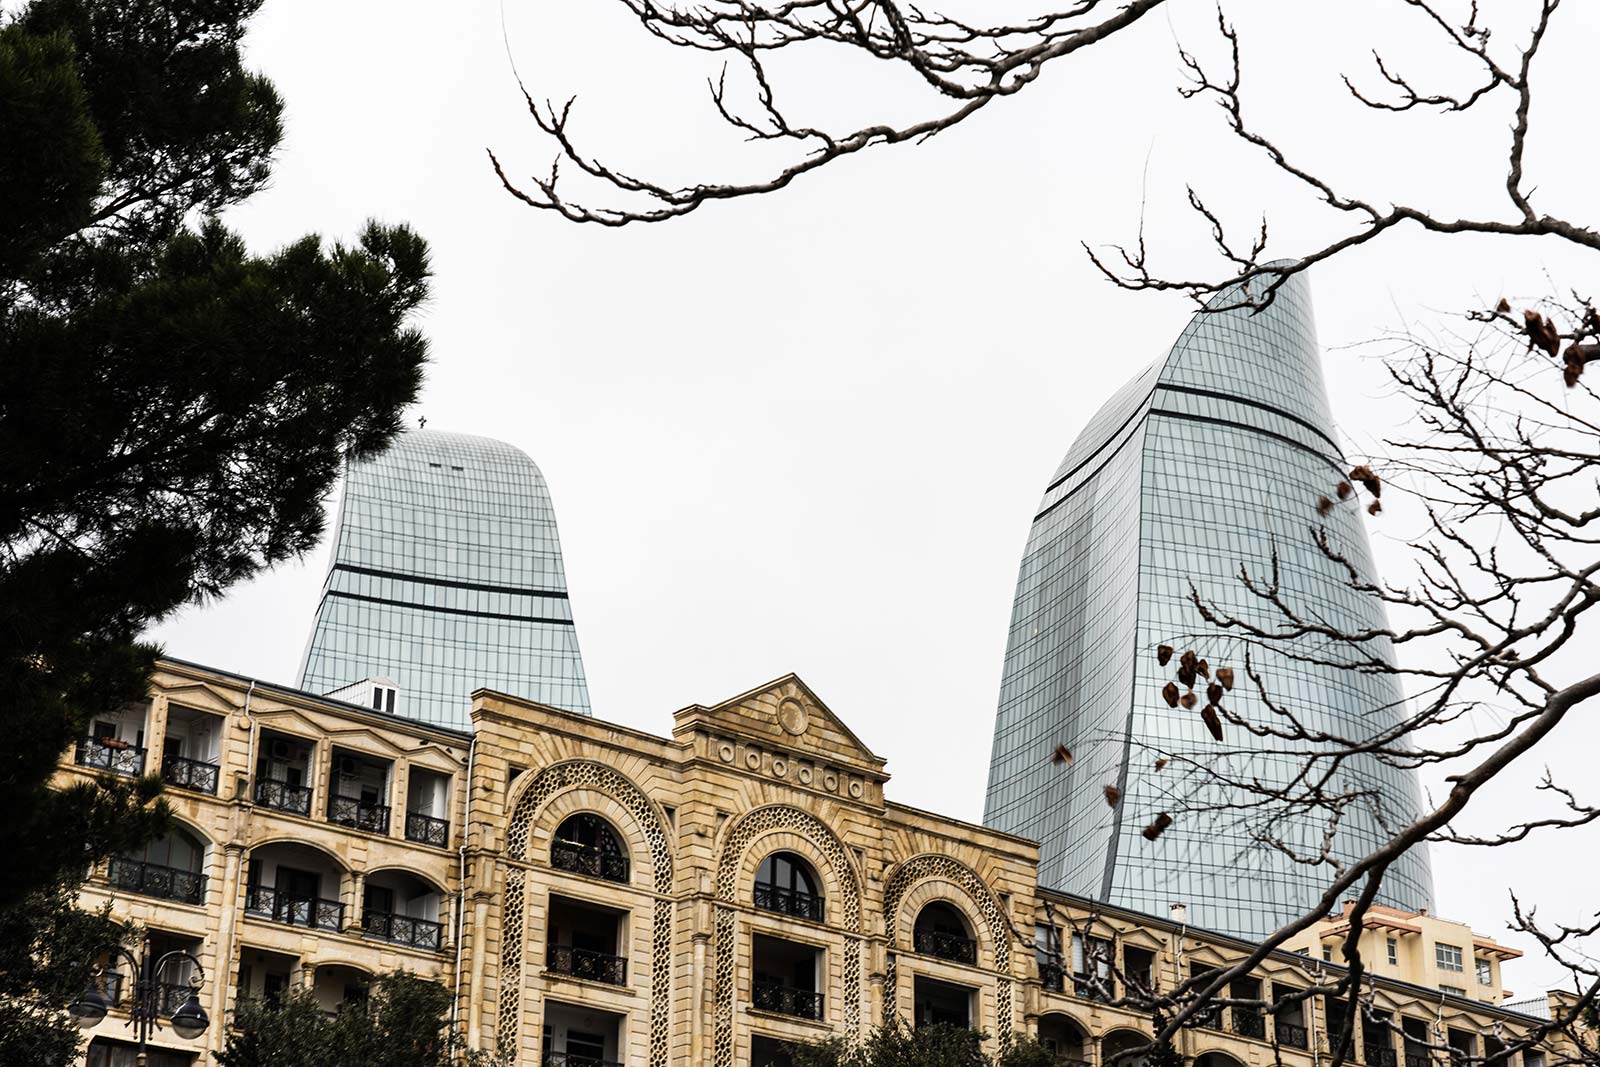 The Flame Towers and old architecture in Baku, Azerbaijan. Confused taxis and pick ups